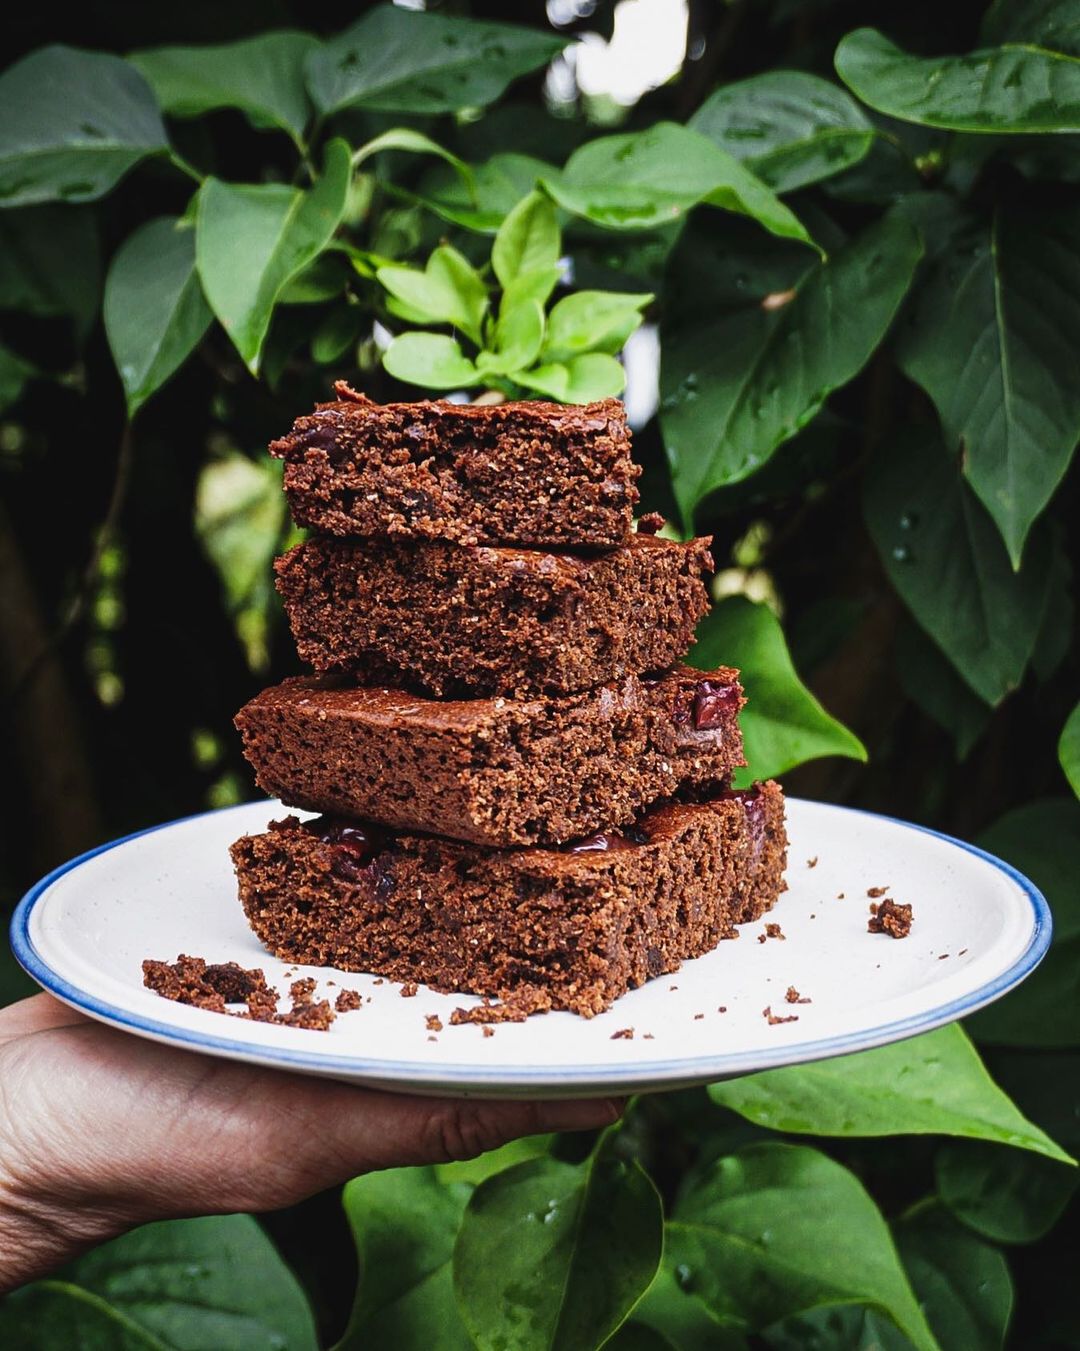 Choclate-Brownies with Chickpea Flour and Cherries